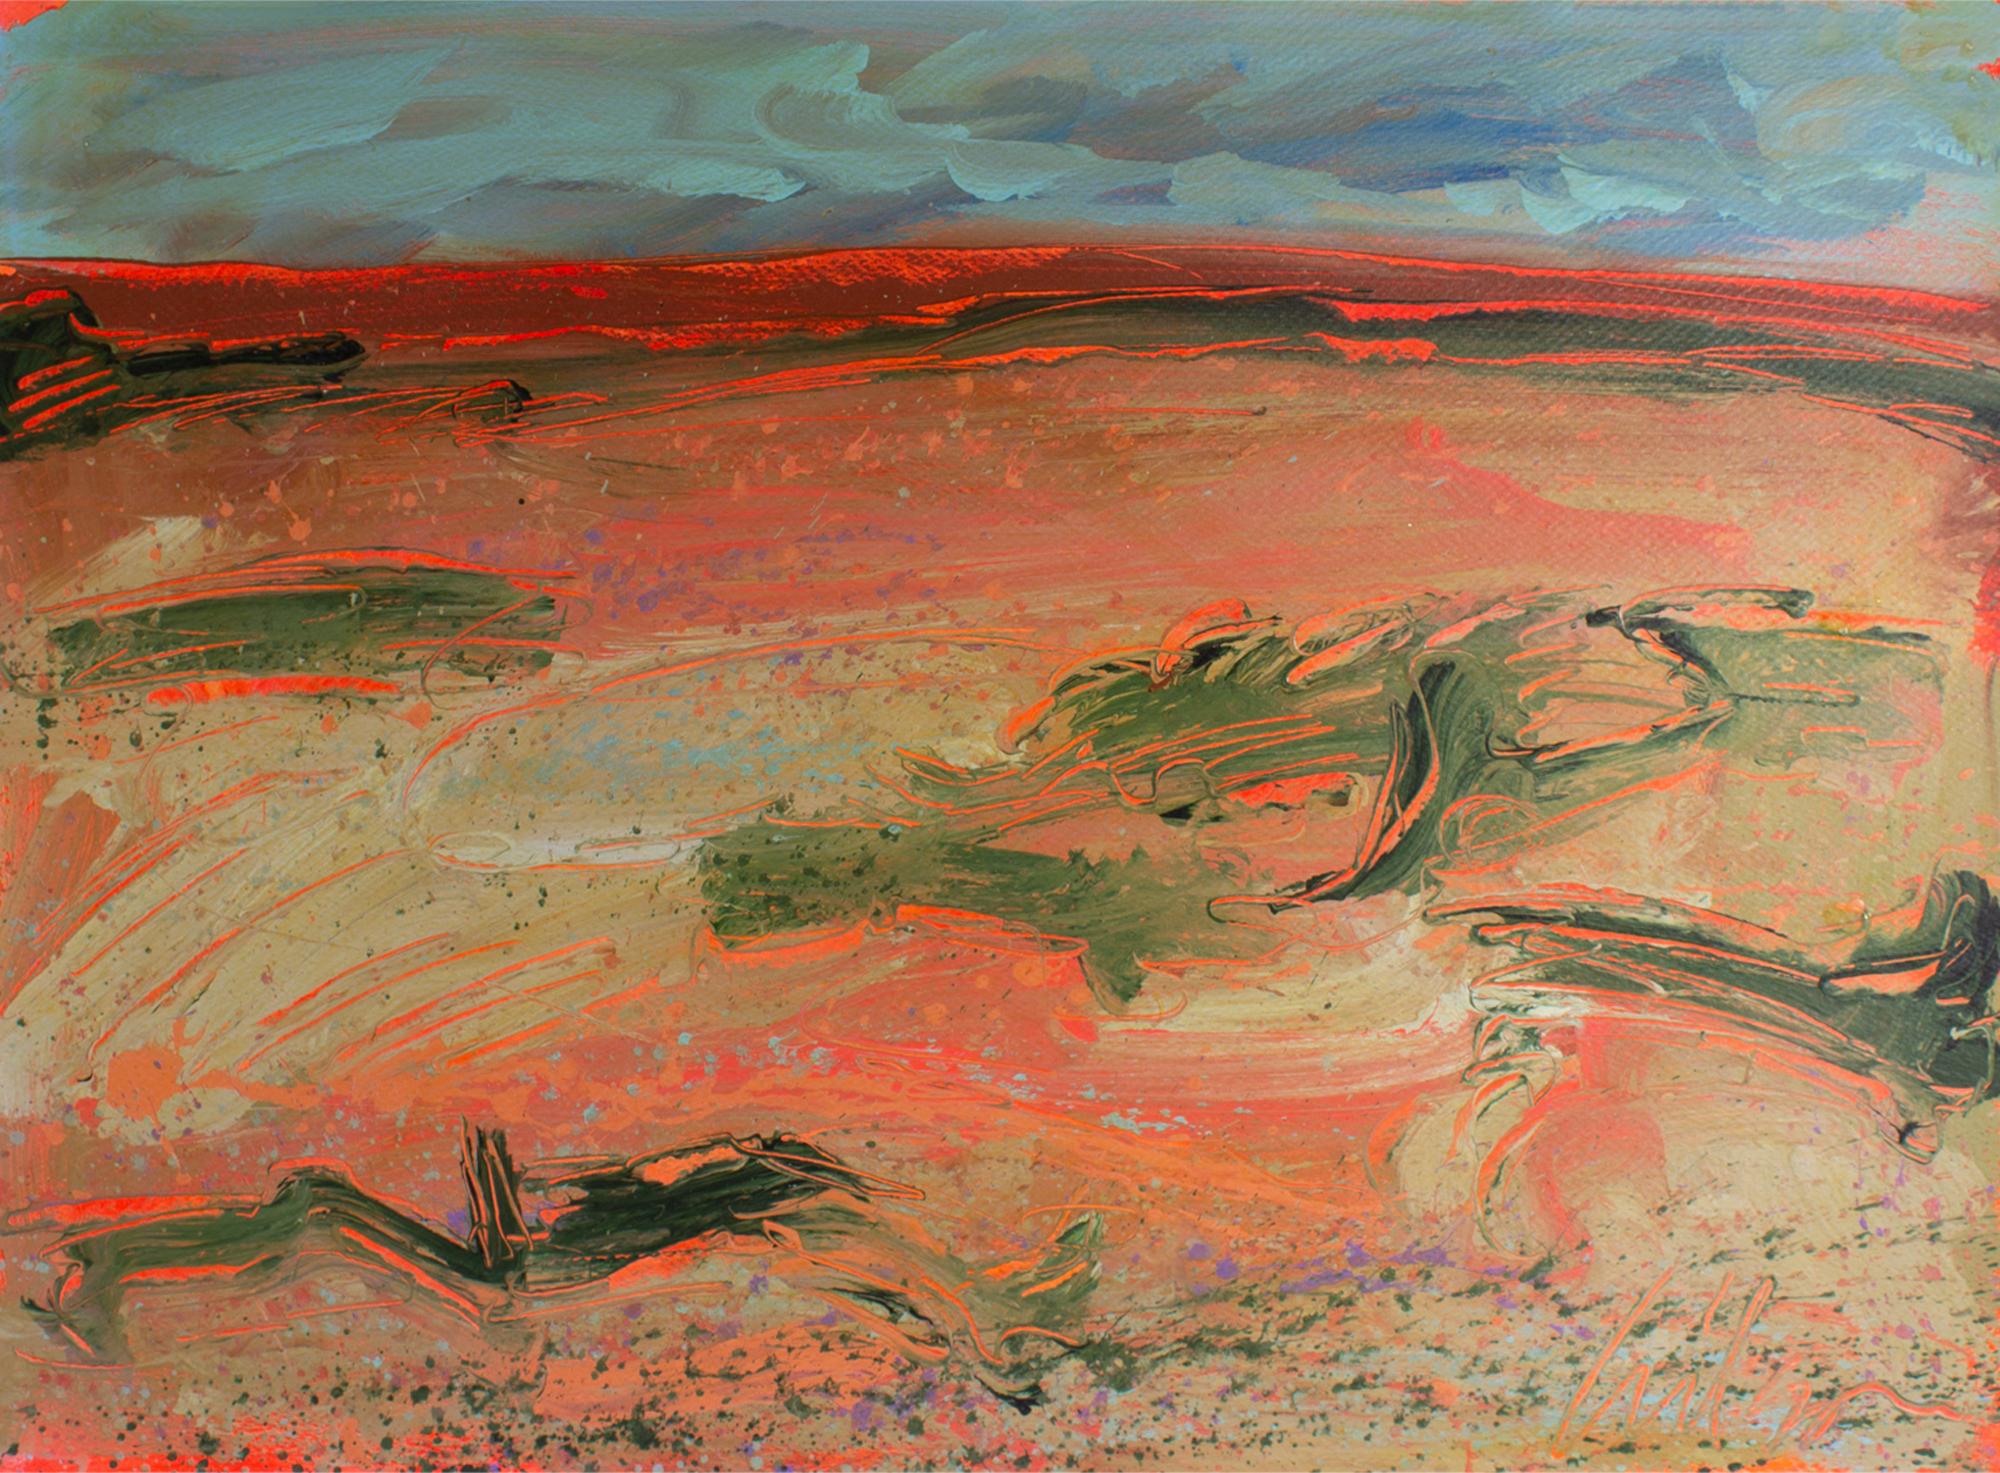 A 1980s acrylic on paper painting by the American artist Harry Hilson (1935-2004). This abstract work depicts a predominantly pink landscape accented with green brushwork and a blue sky above. Signed lower right, the work is unframed.

Harry Hilson